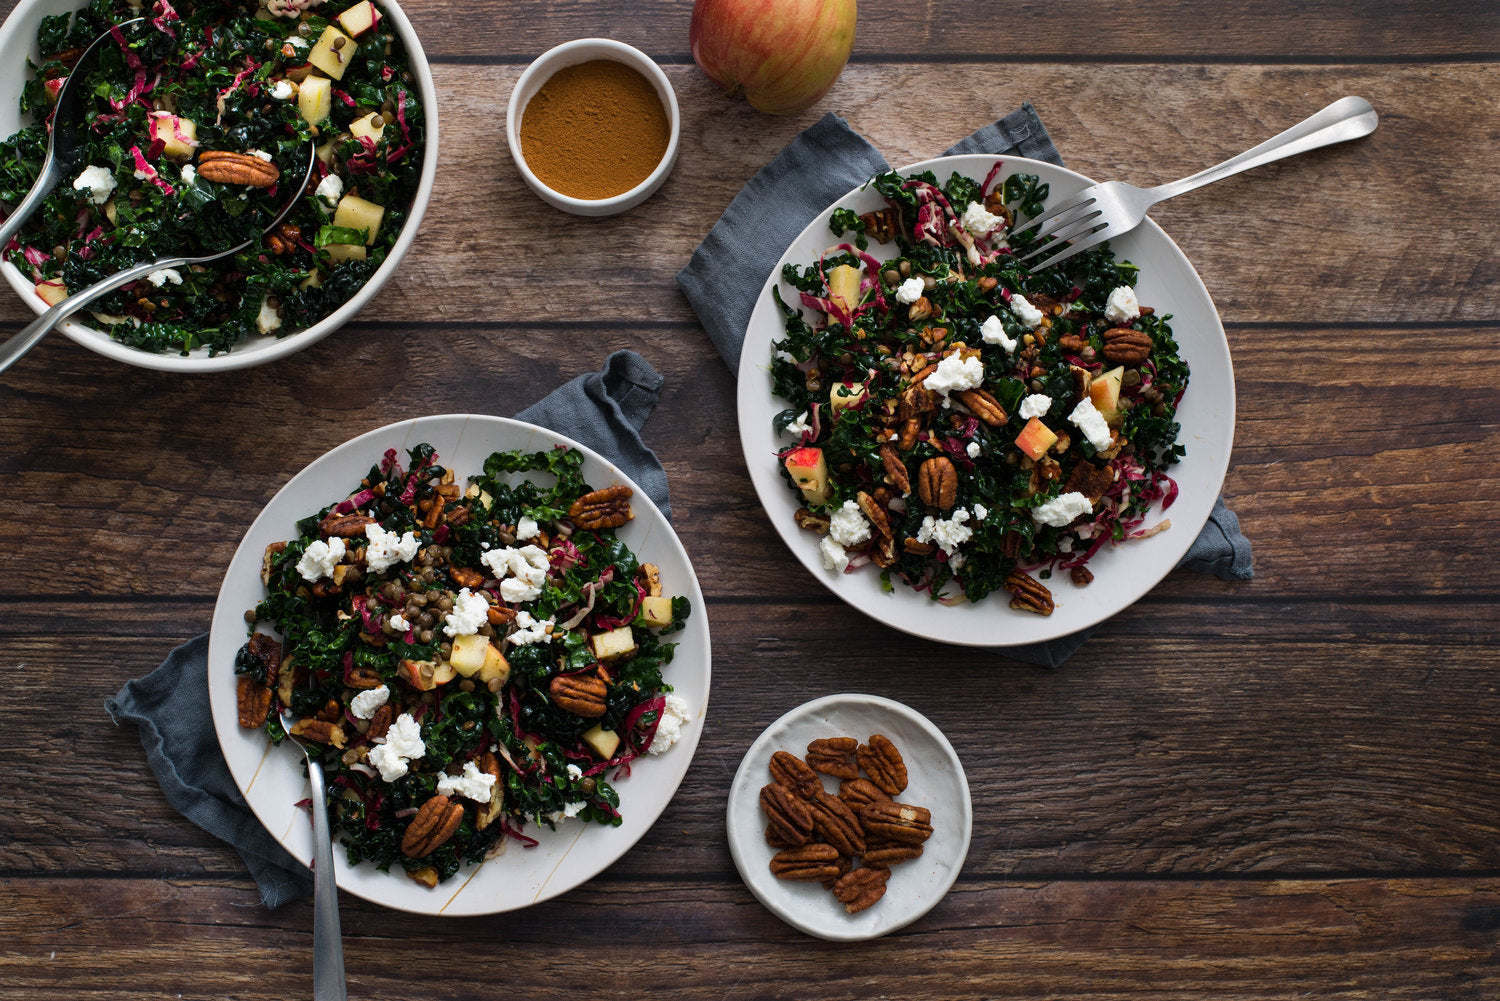 Santé Nuts - Kale and Lentil Salad with Pecans and Goat Cheese - Recipe